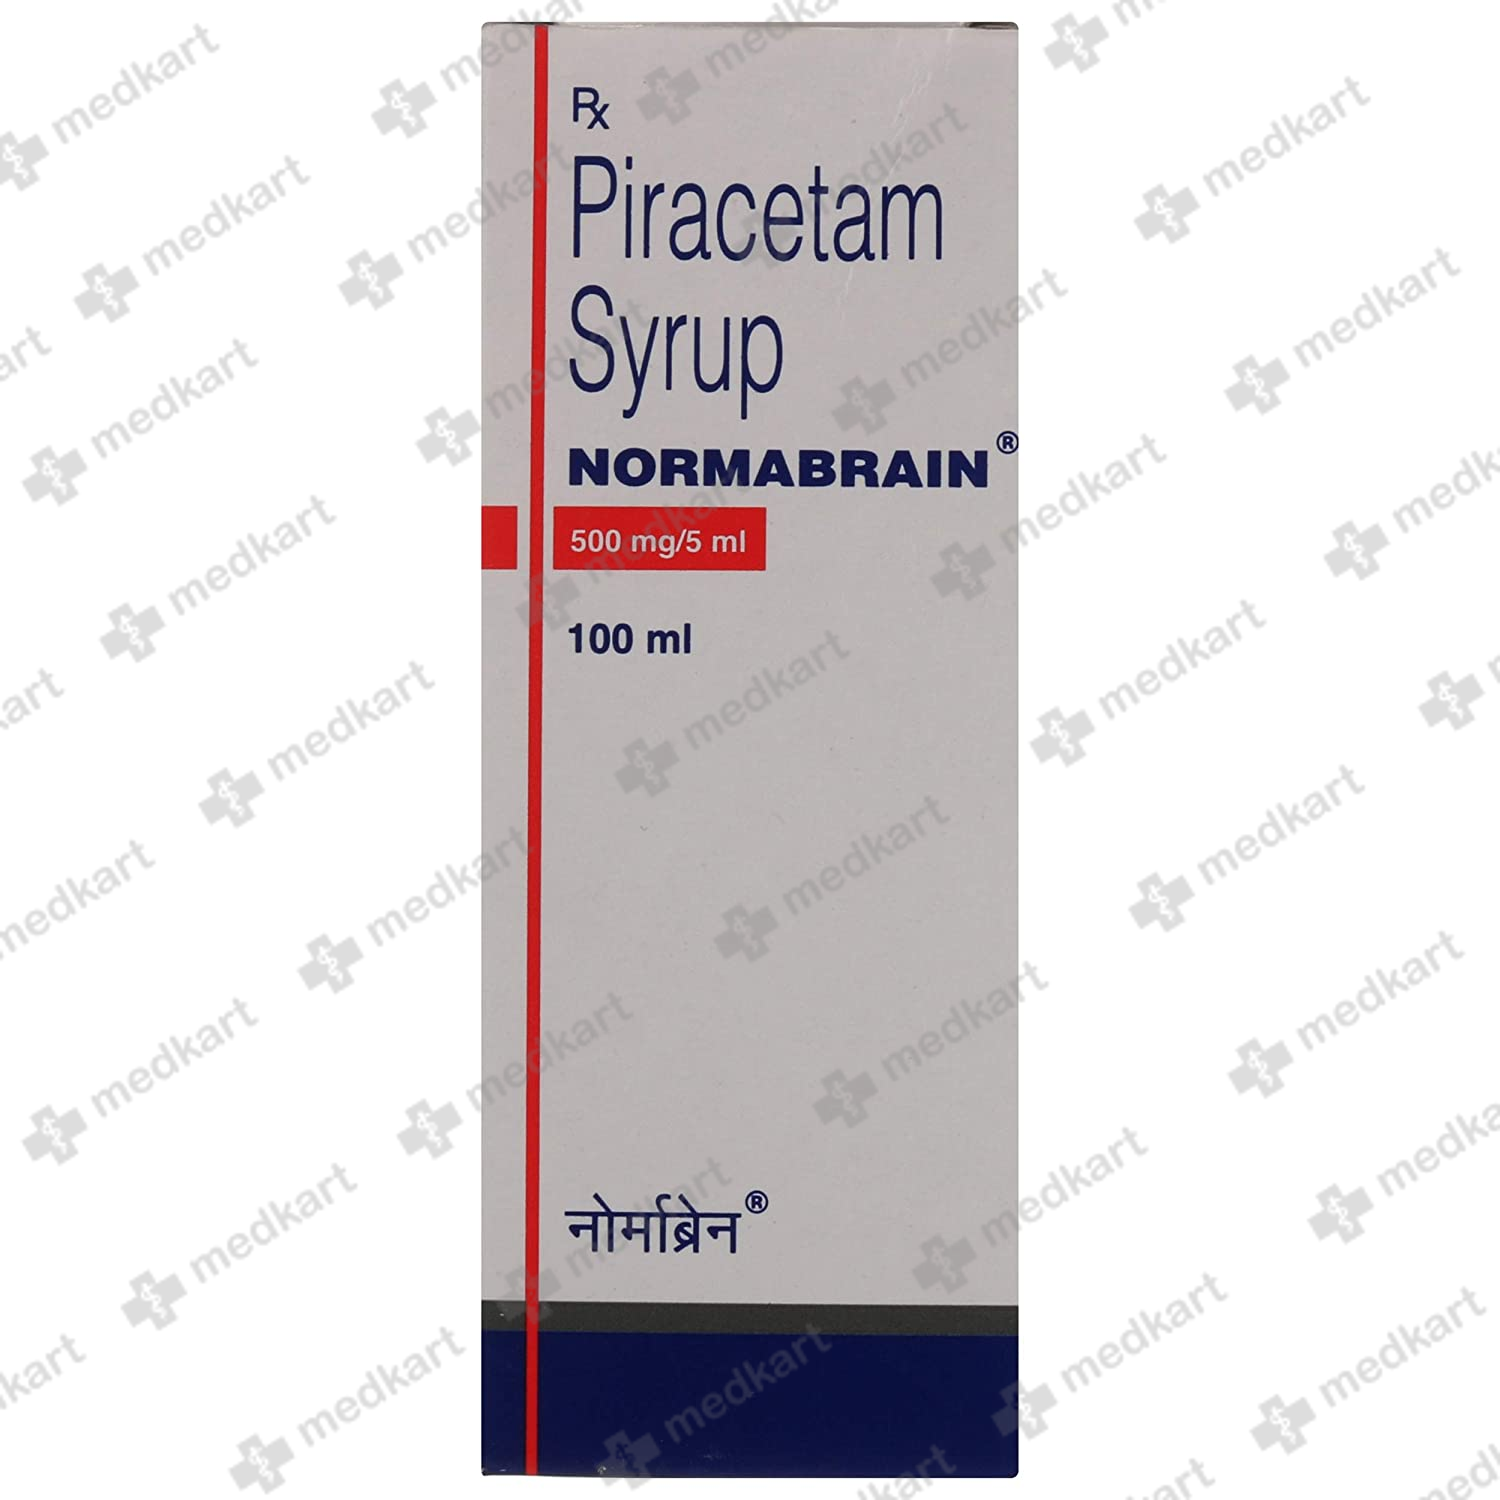 NORMABRAIN SYP 100ML